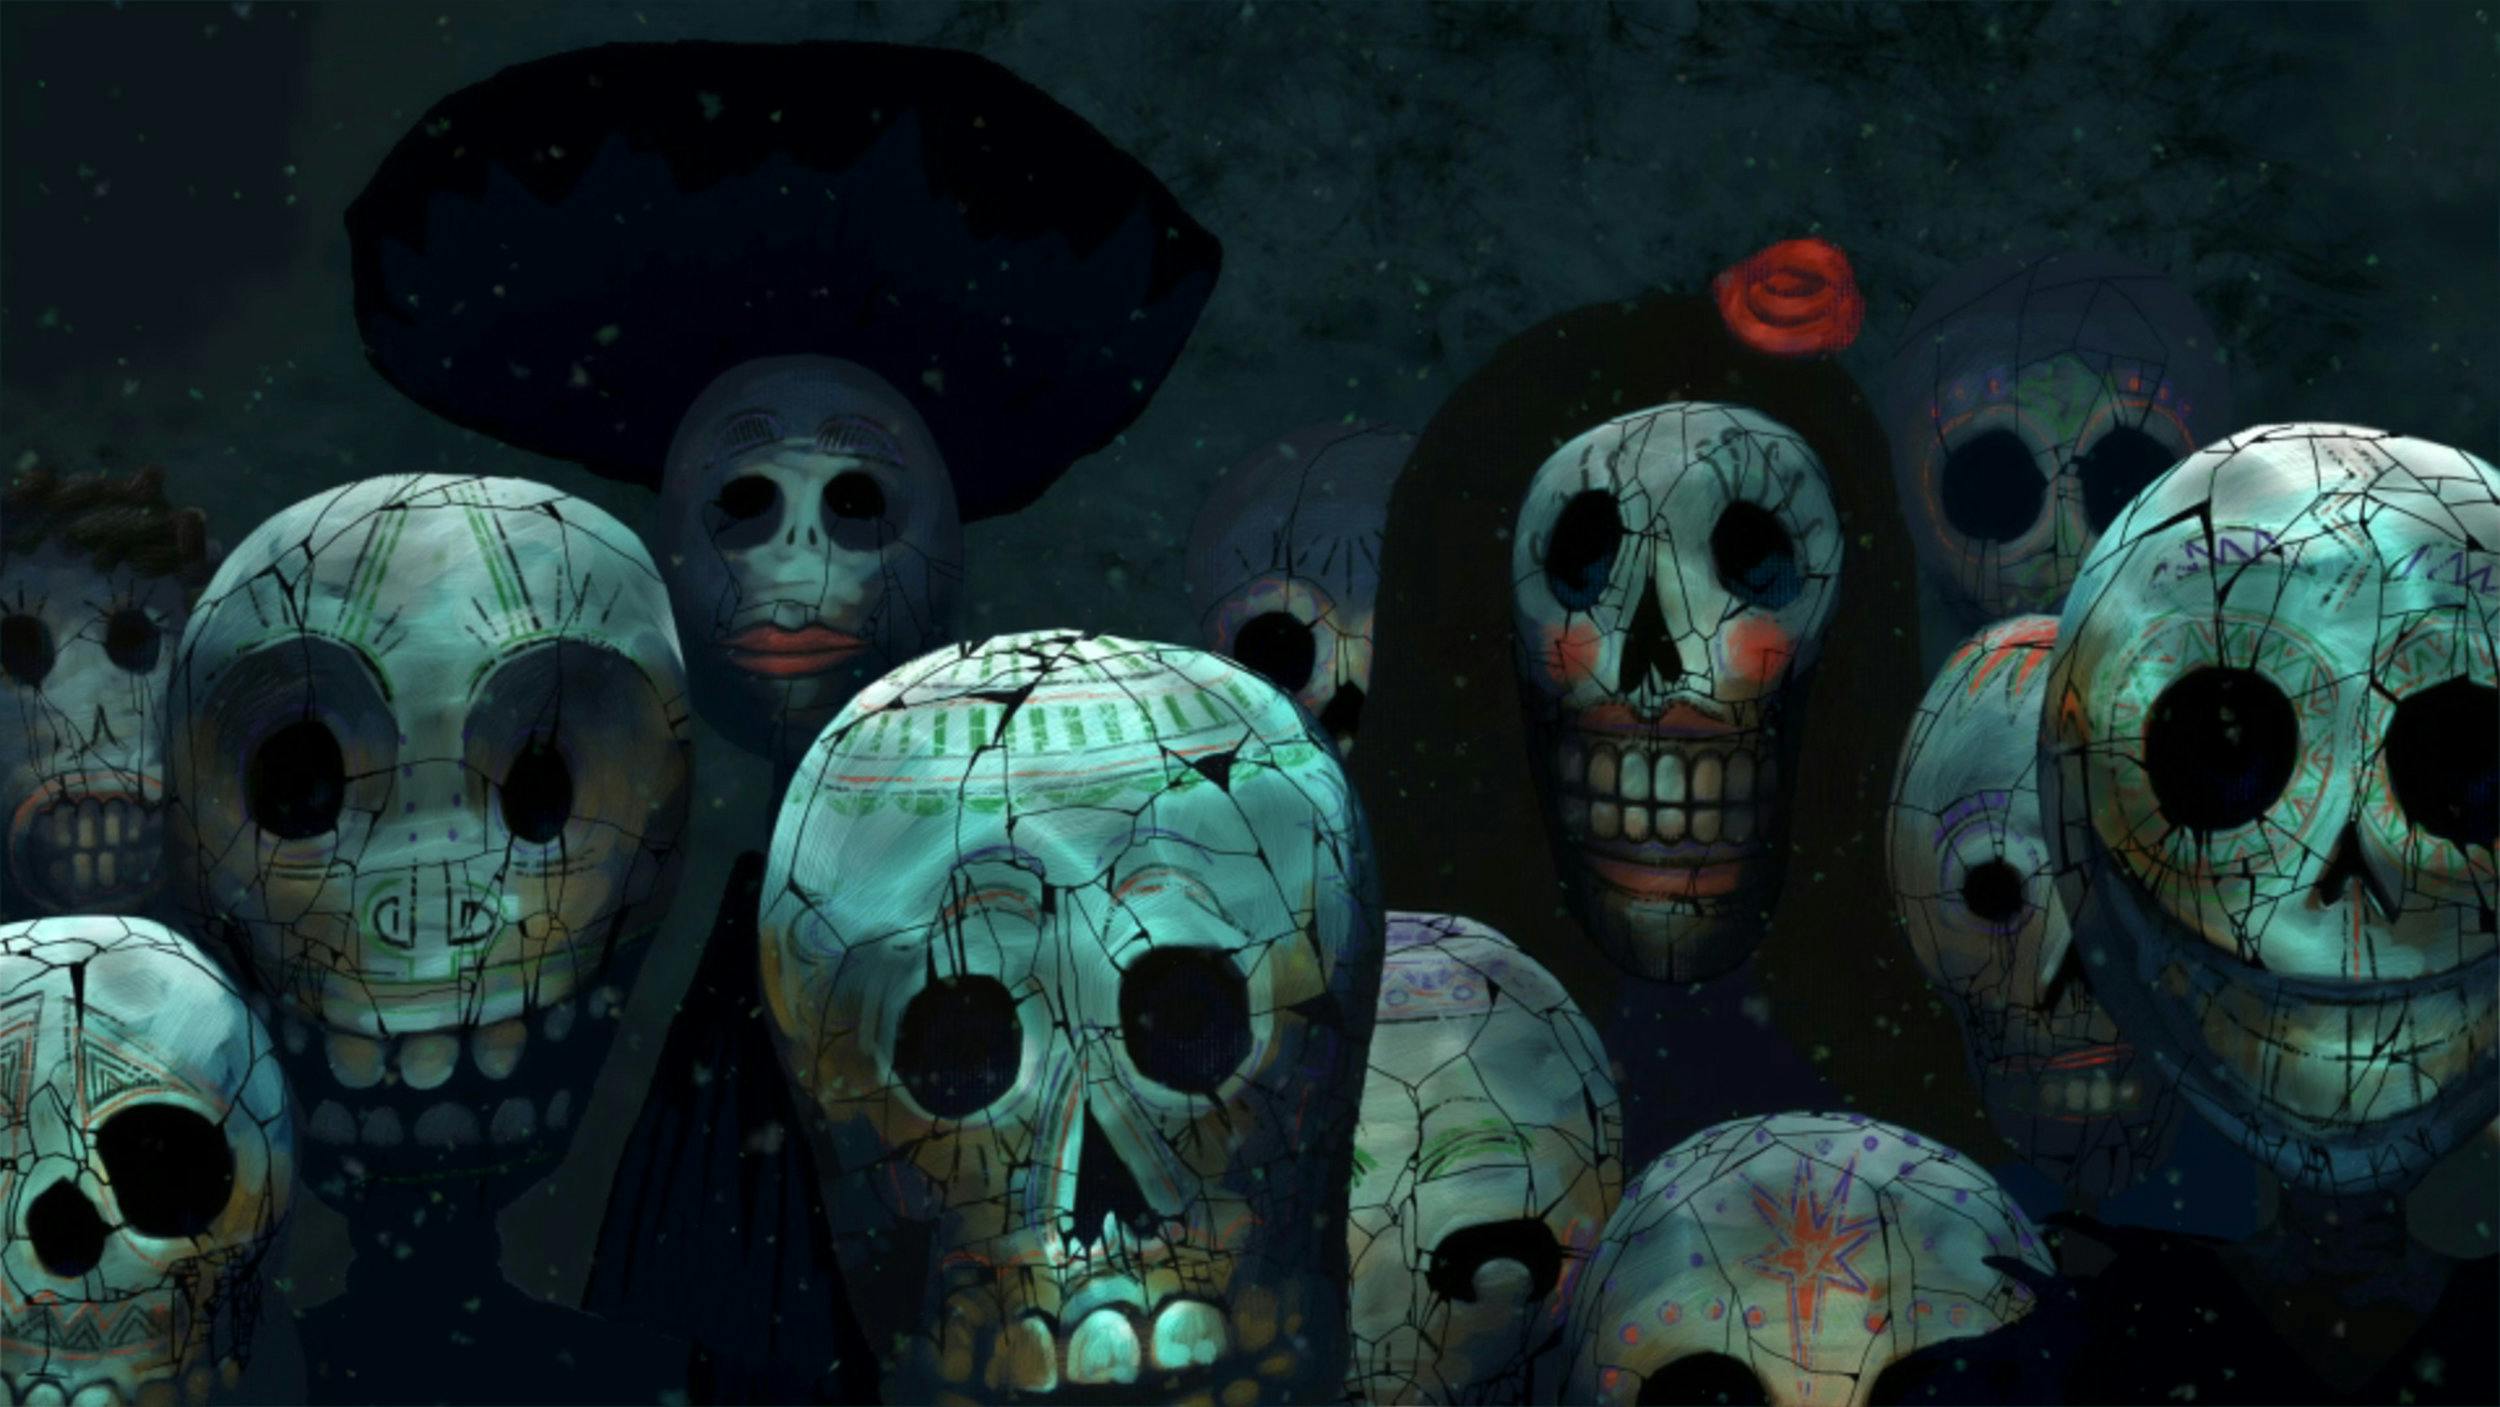 Dark blue tones, show a series of cracked skulls decorated with Day of the Dead imagery